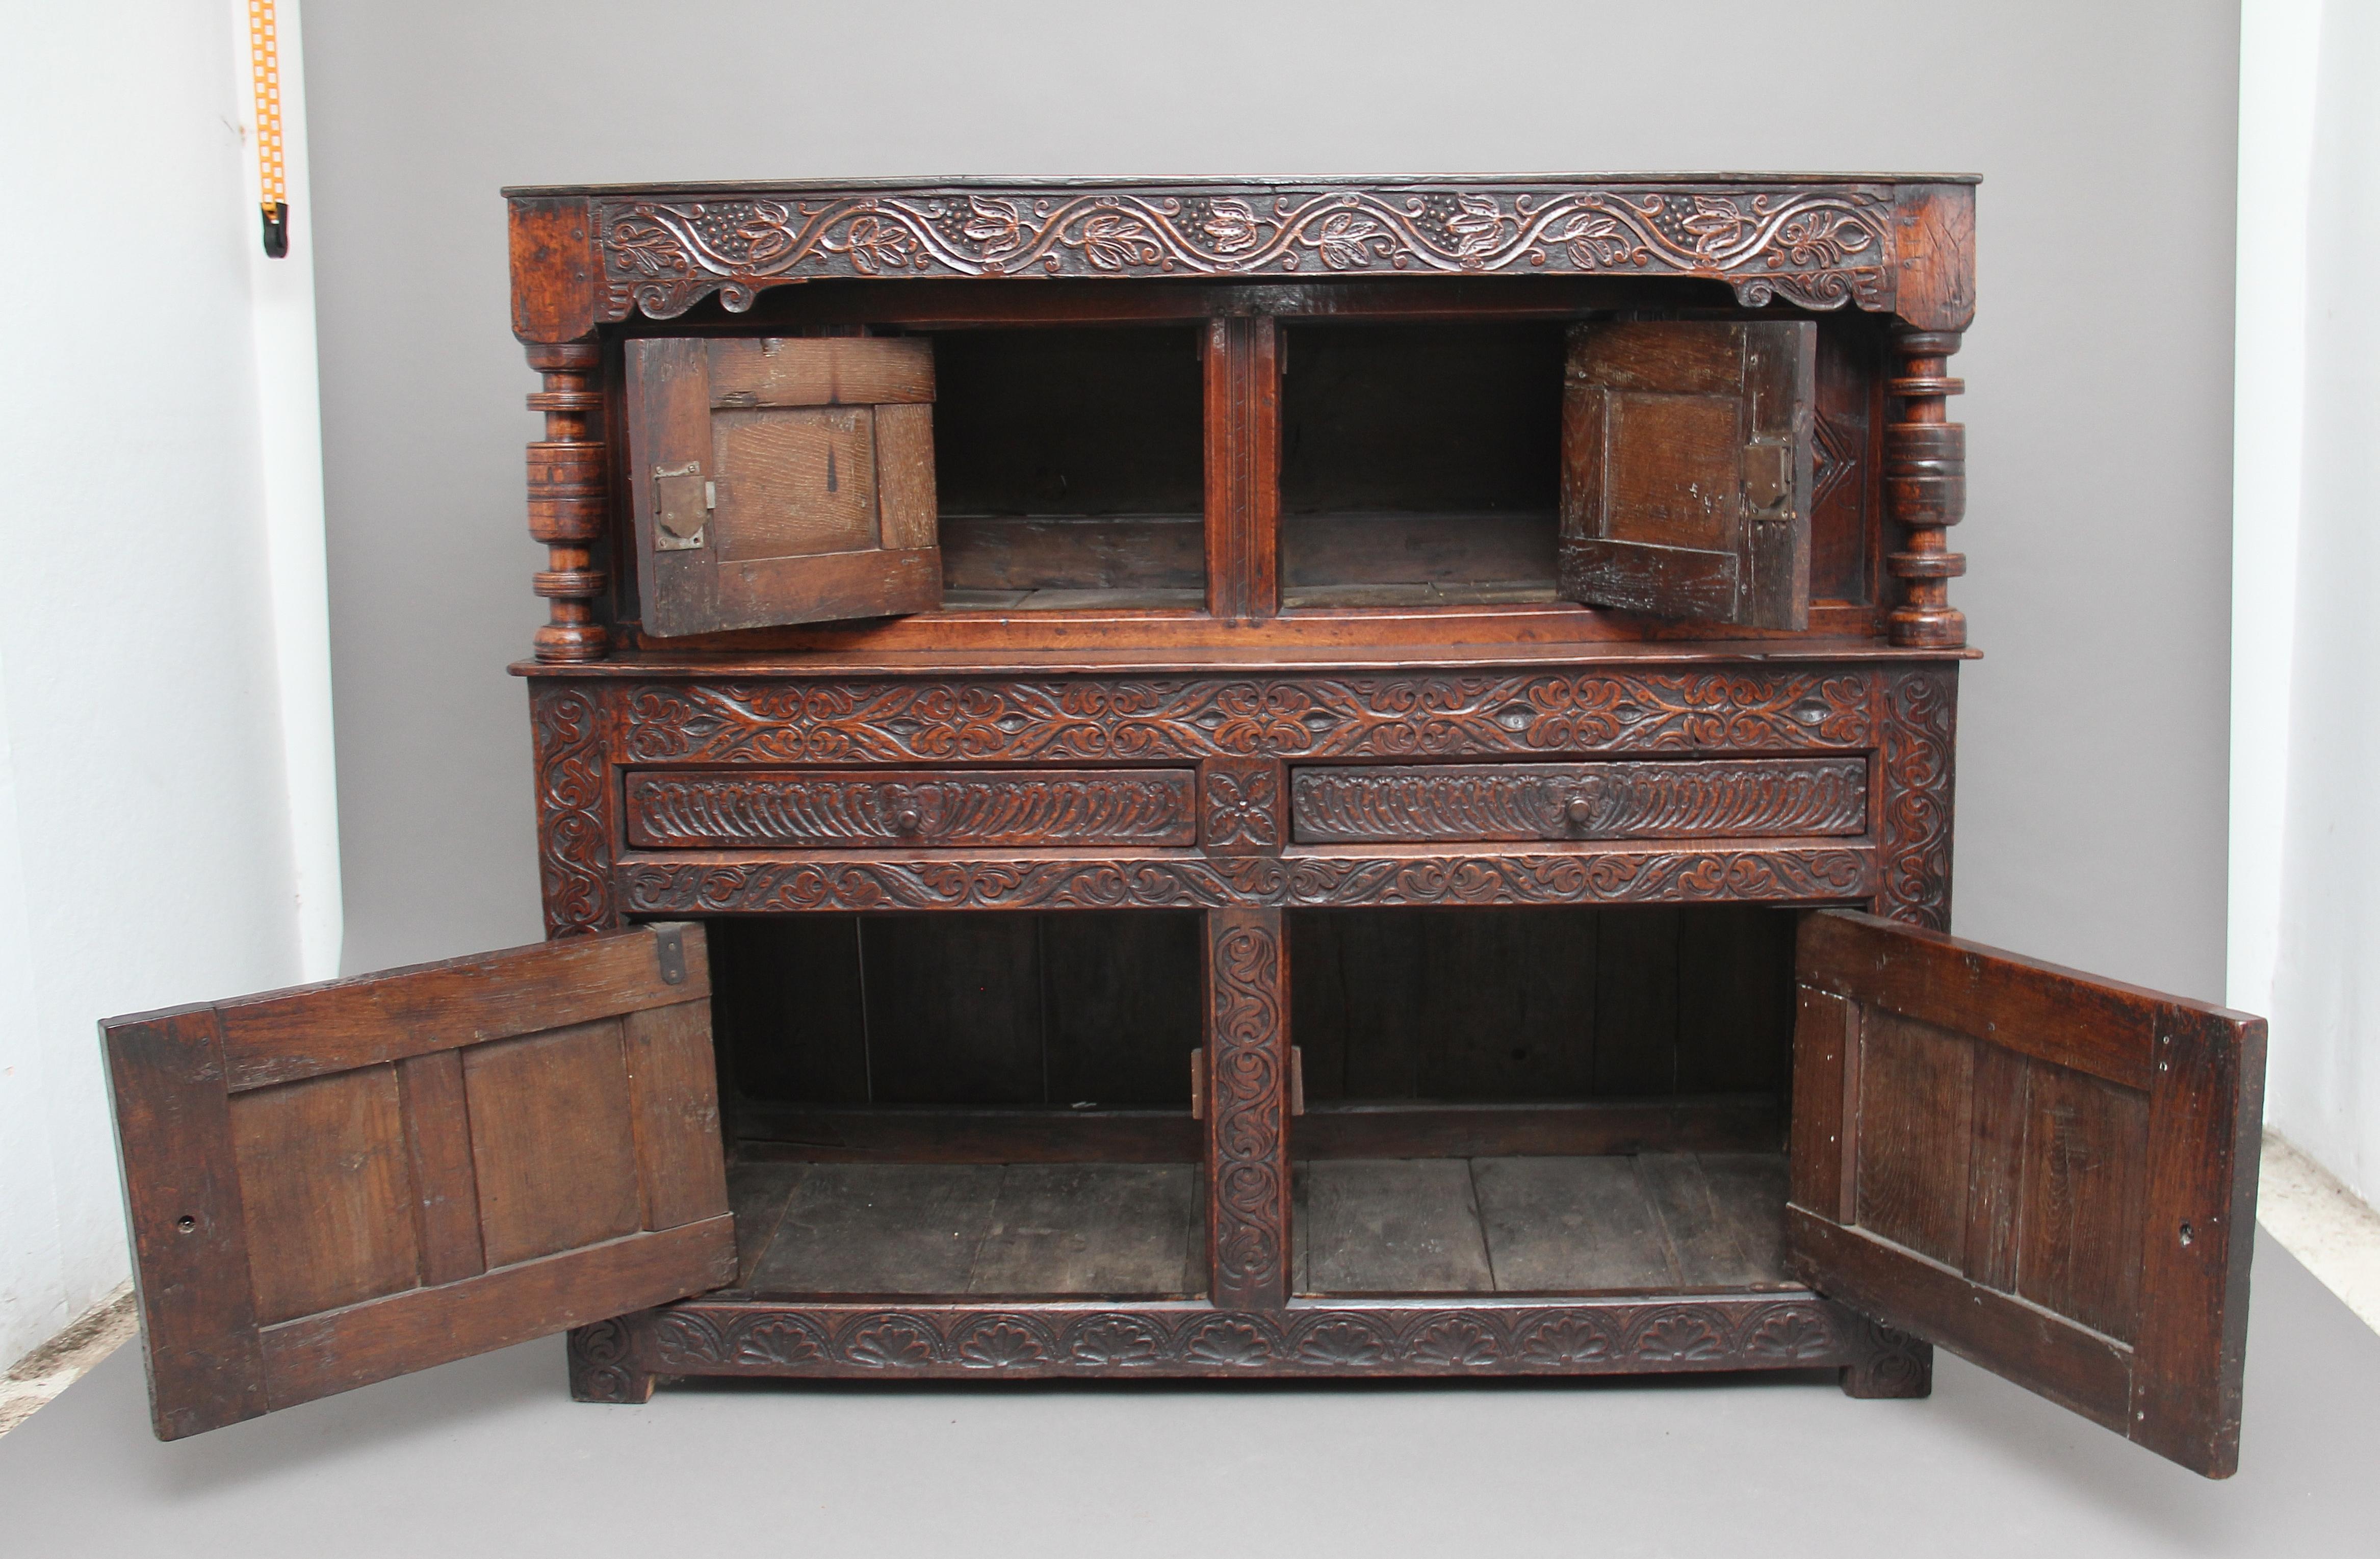 A lovely quality mid-17th century oak court cupboard of good proportions, the cupboard decorated with carved scrolling vines, the frieze over two cupboard doors flanked by turned columns, two oak lined drawers at the centre with lovely carved drawer